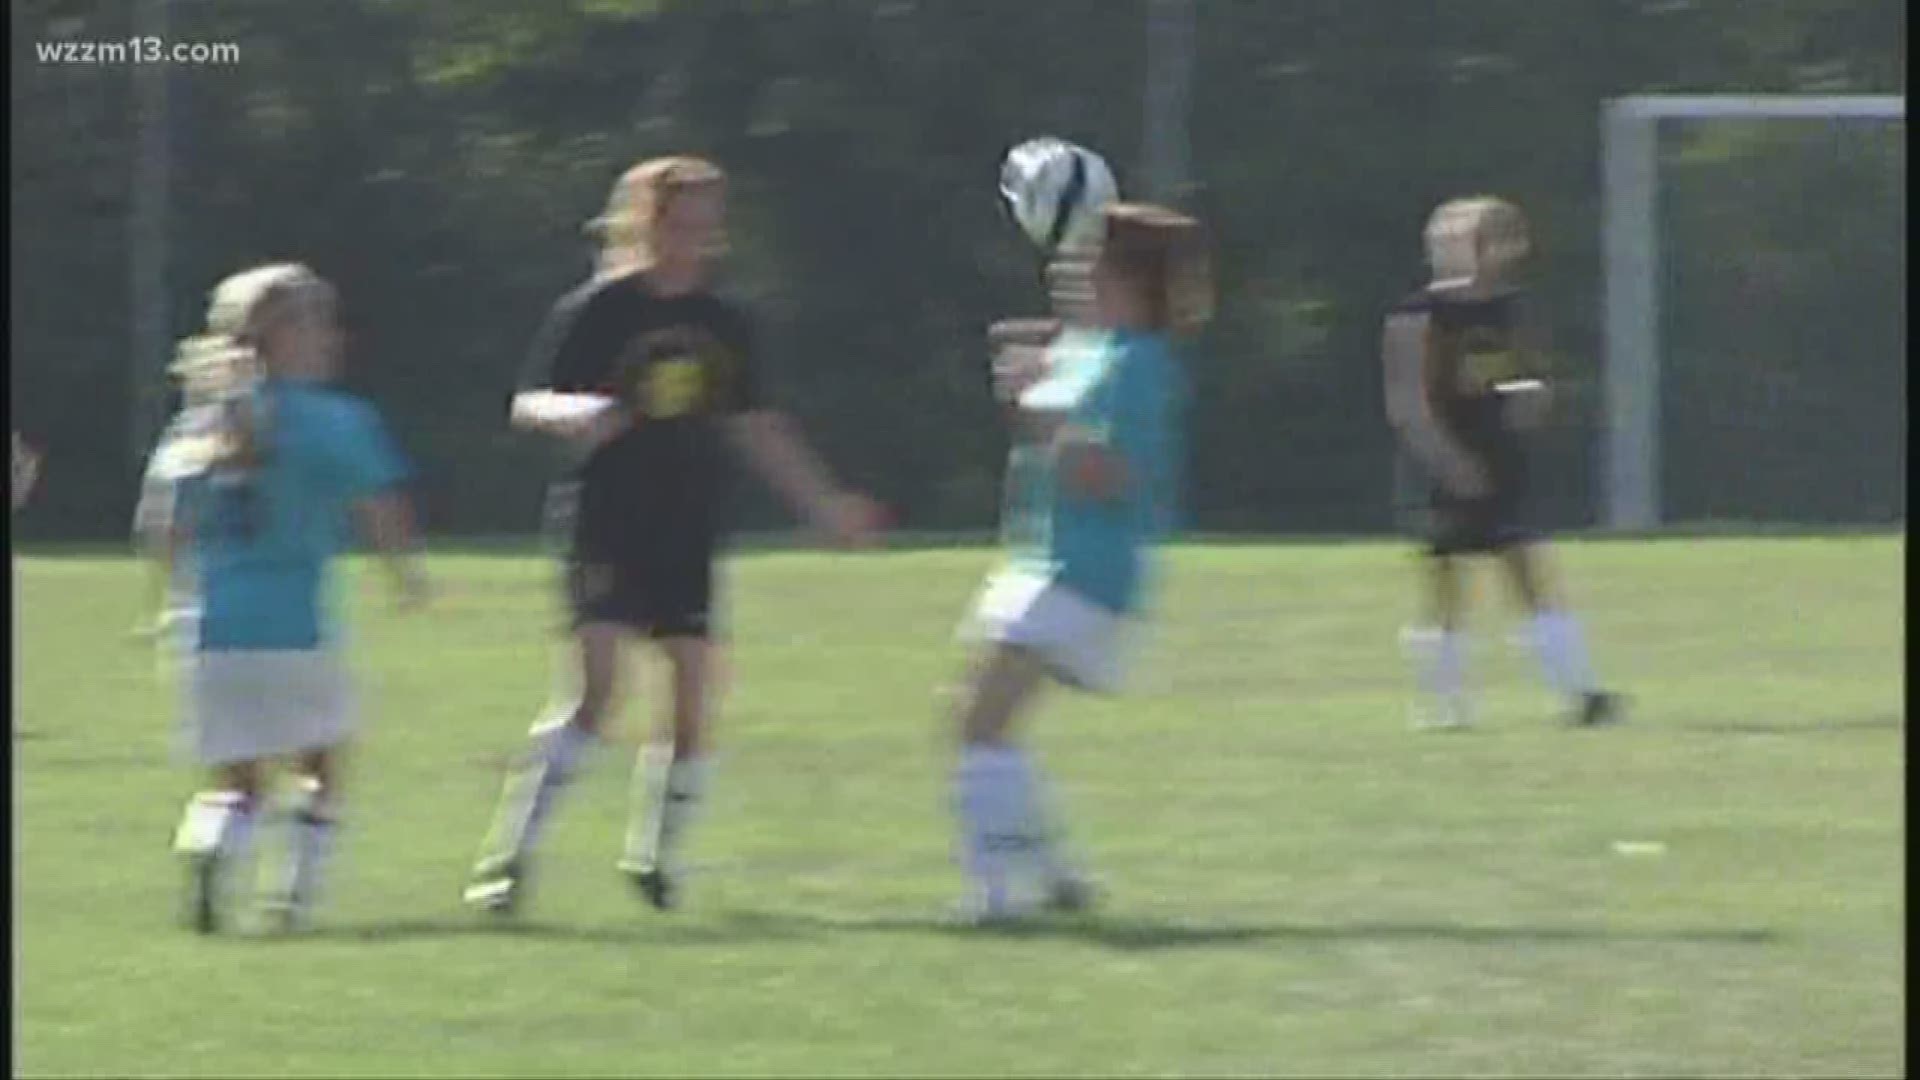 CDC issues guidelines on child concussions